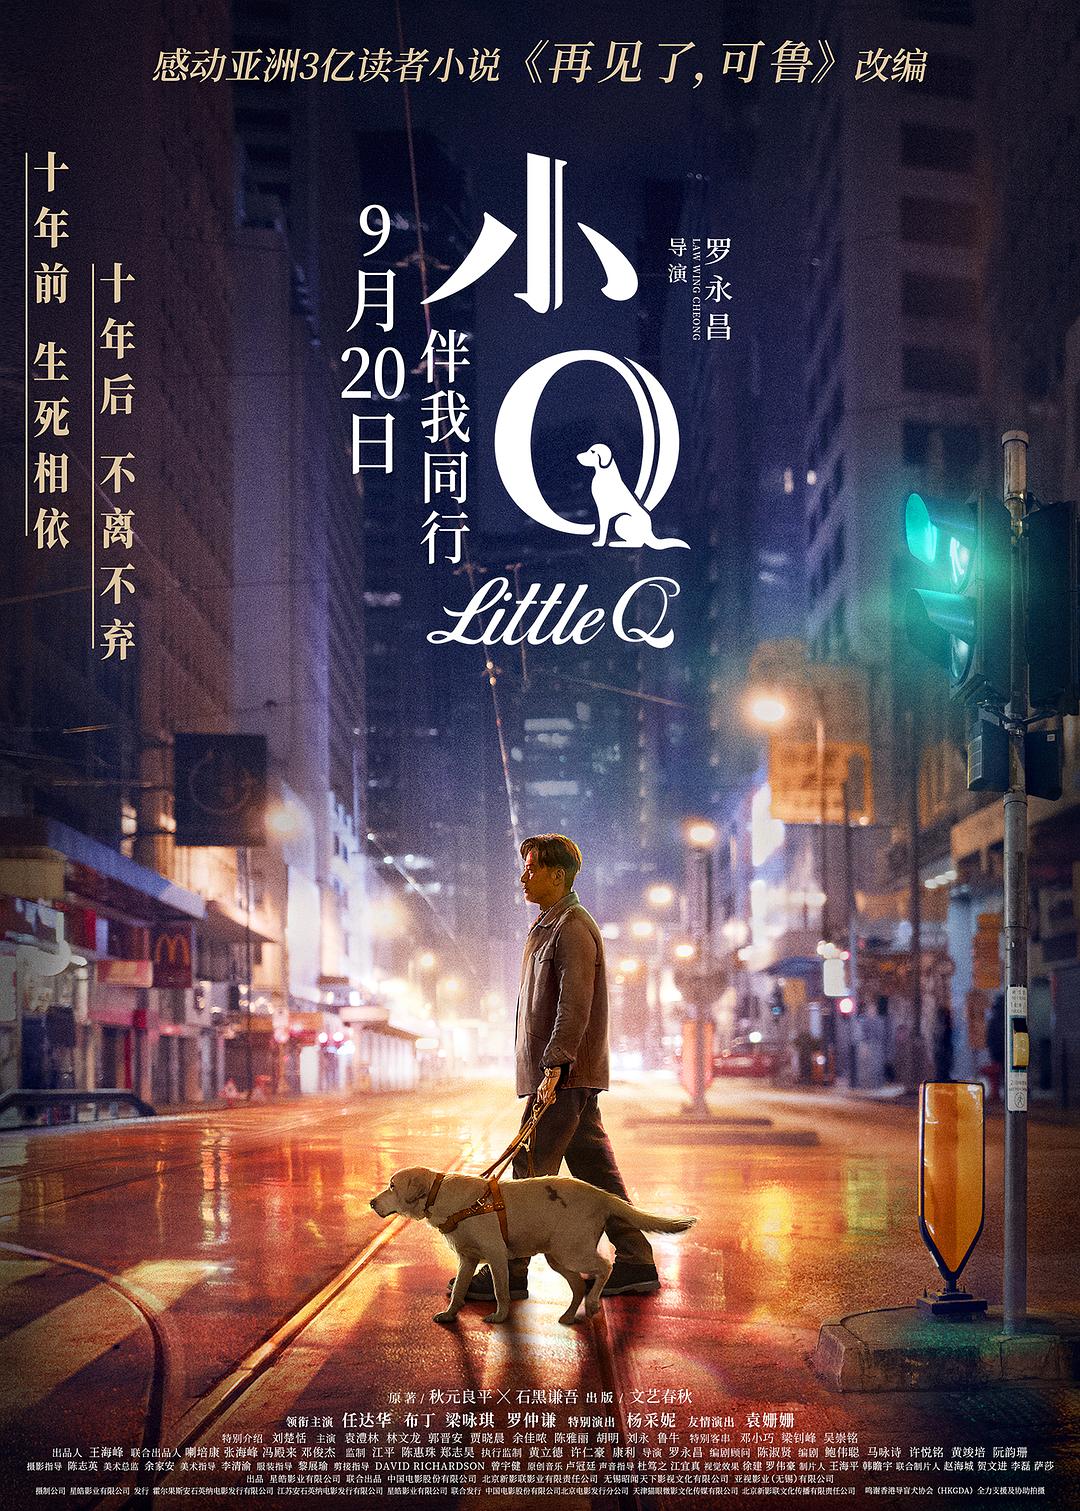 СQ Little.Q.2019.CHINESE.1080p.BluRay.x264.DD5.1-PTer 10.41GB-1.png